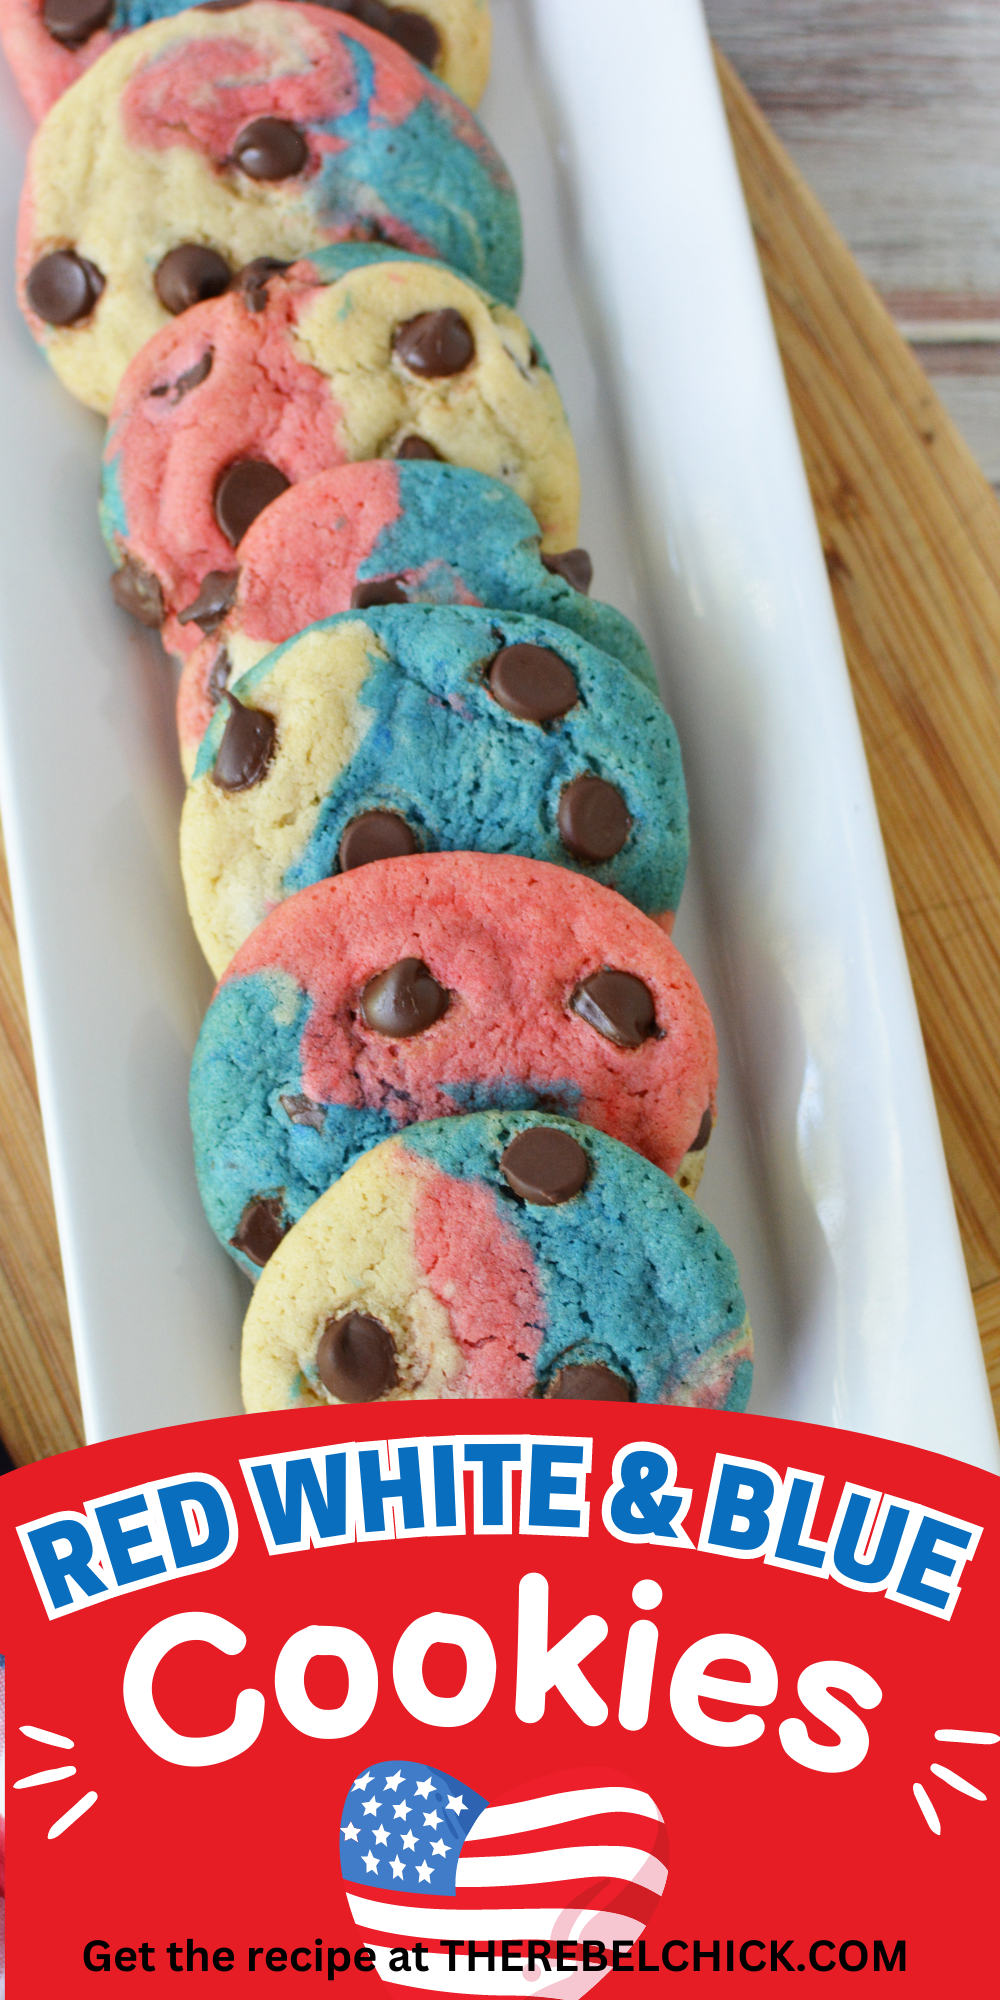 Red White & Blue Chocolate Chip Cookies Recip